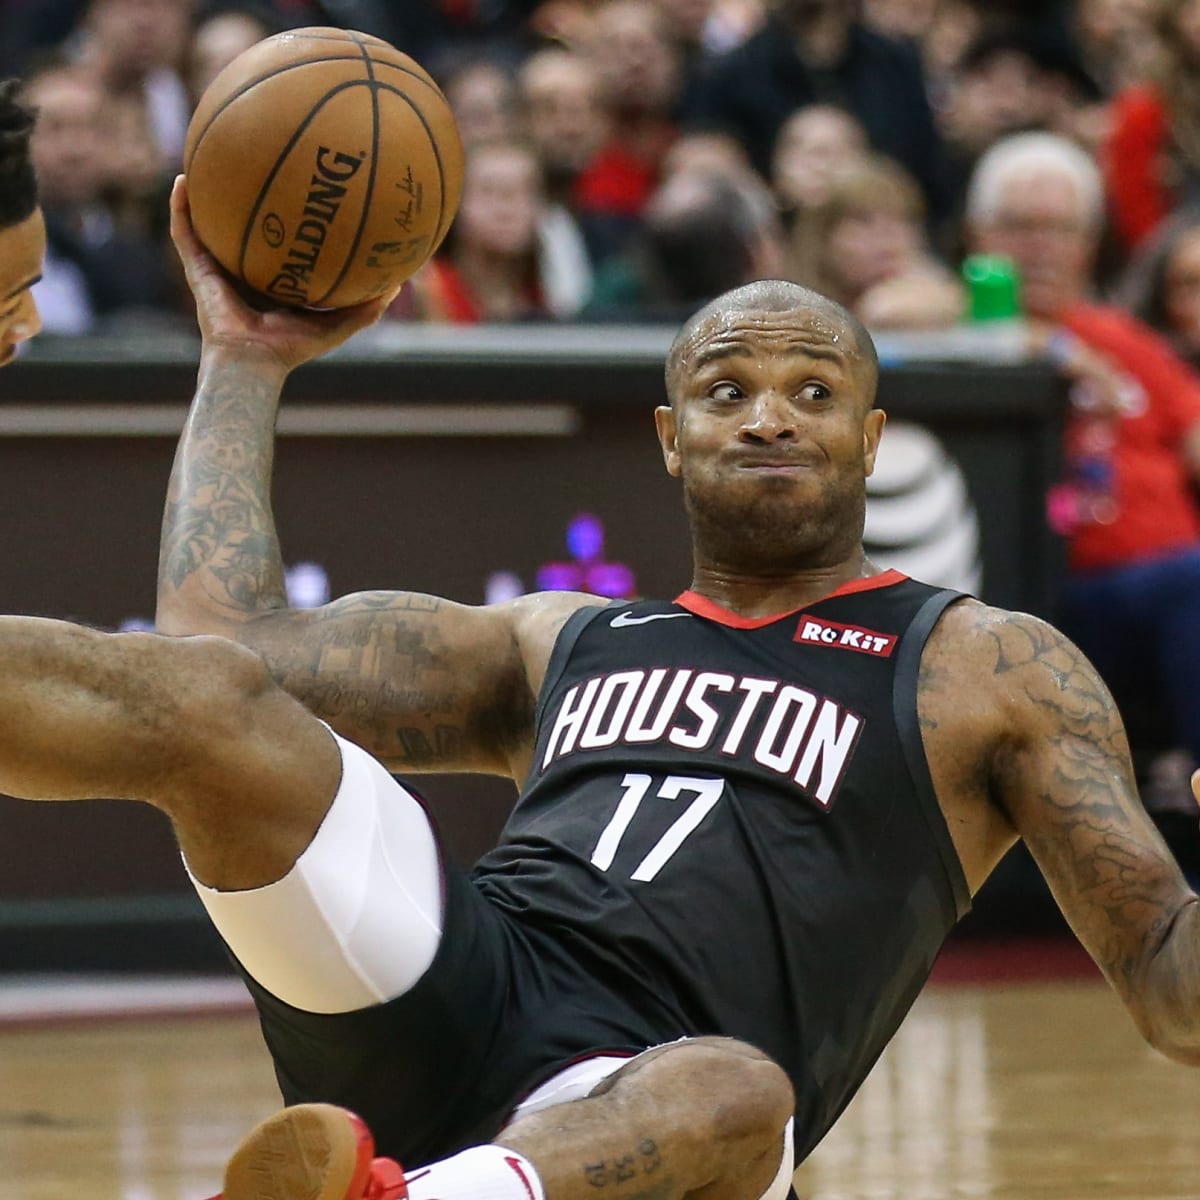 Report: PJ Tucker was 'irate' over contract situation with Rockets